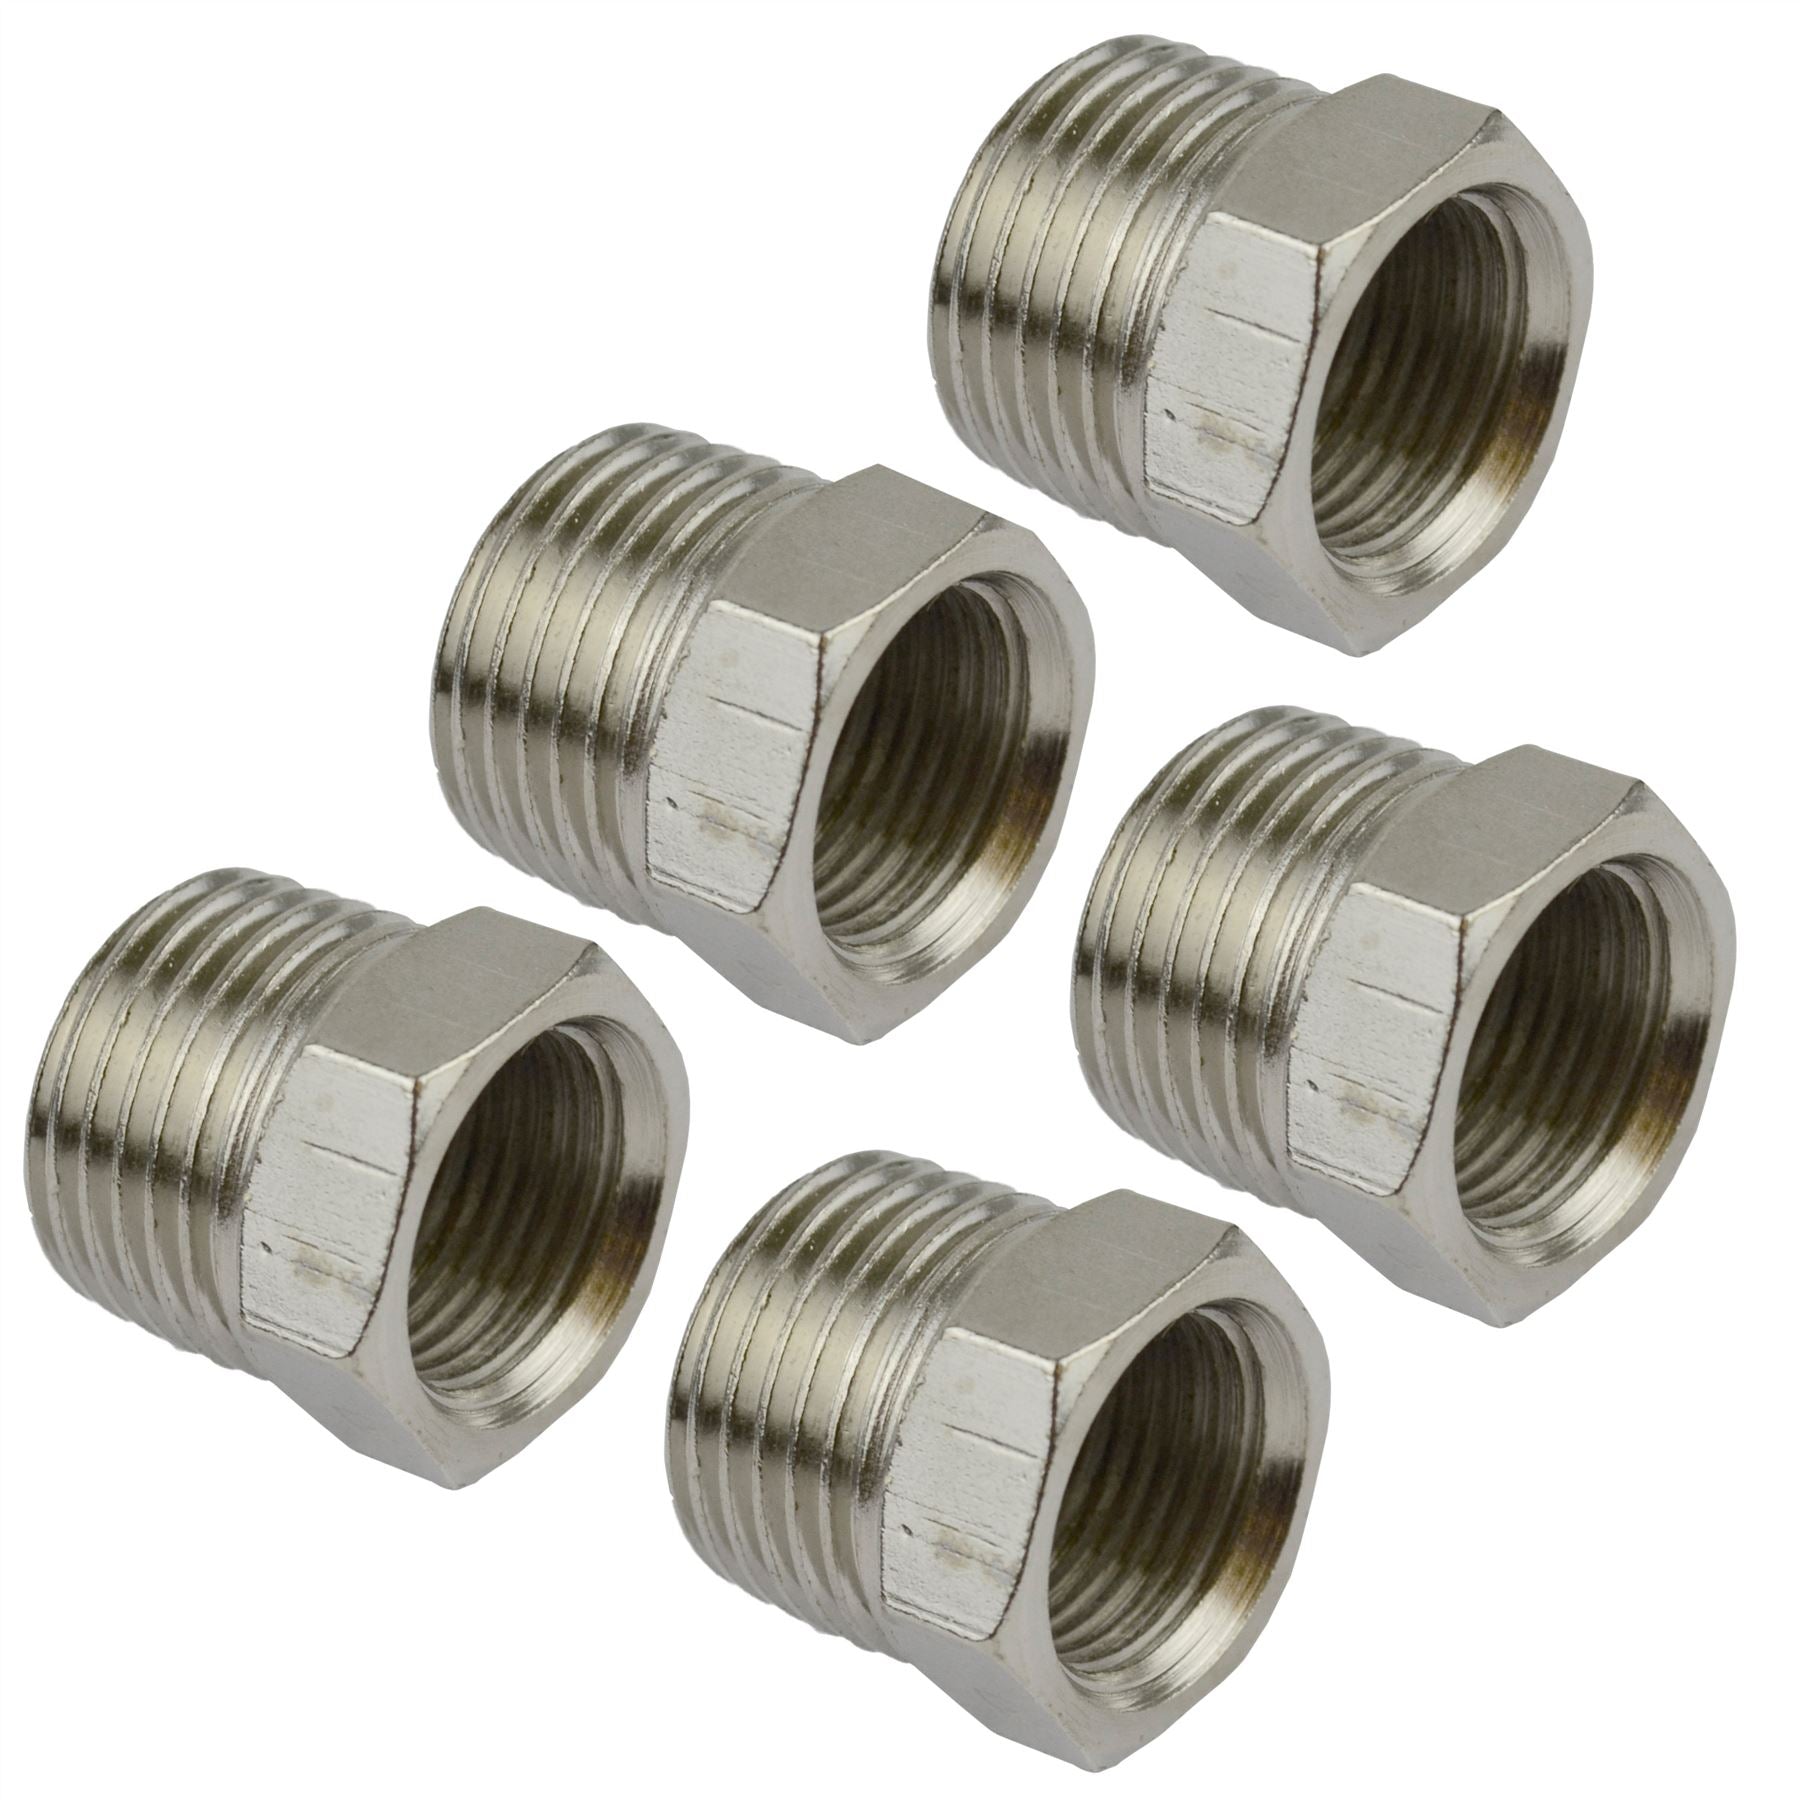 Air Line Hose Threaded Bush Adapter Fitting Connector Female to Male BSP